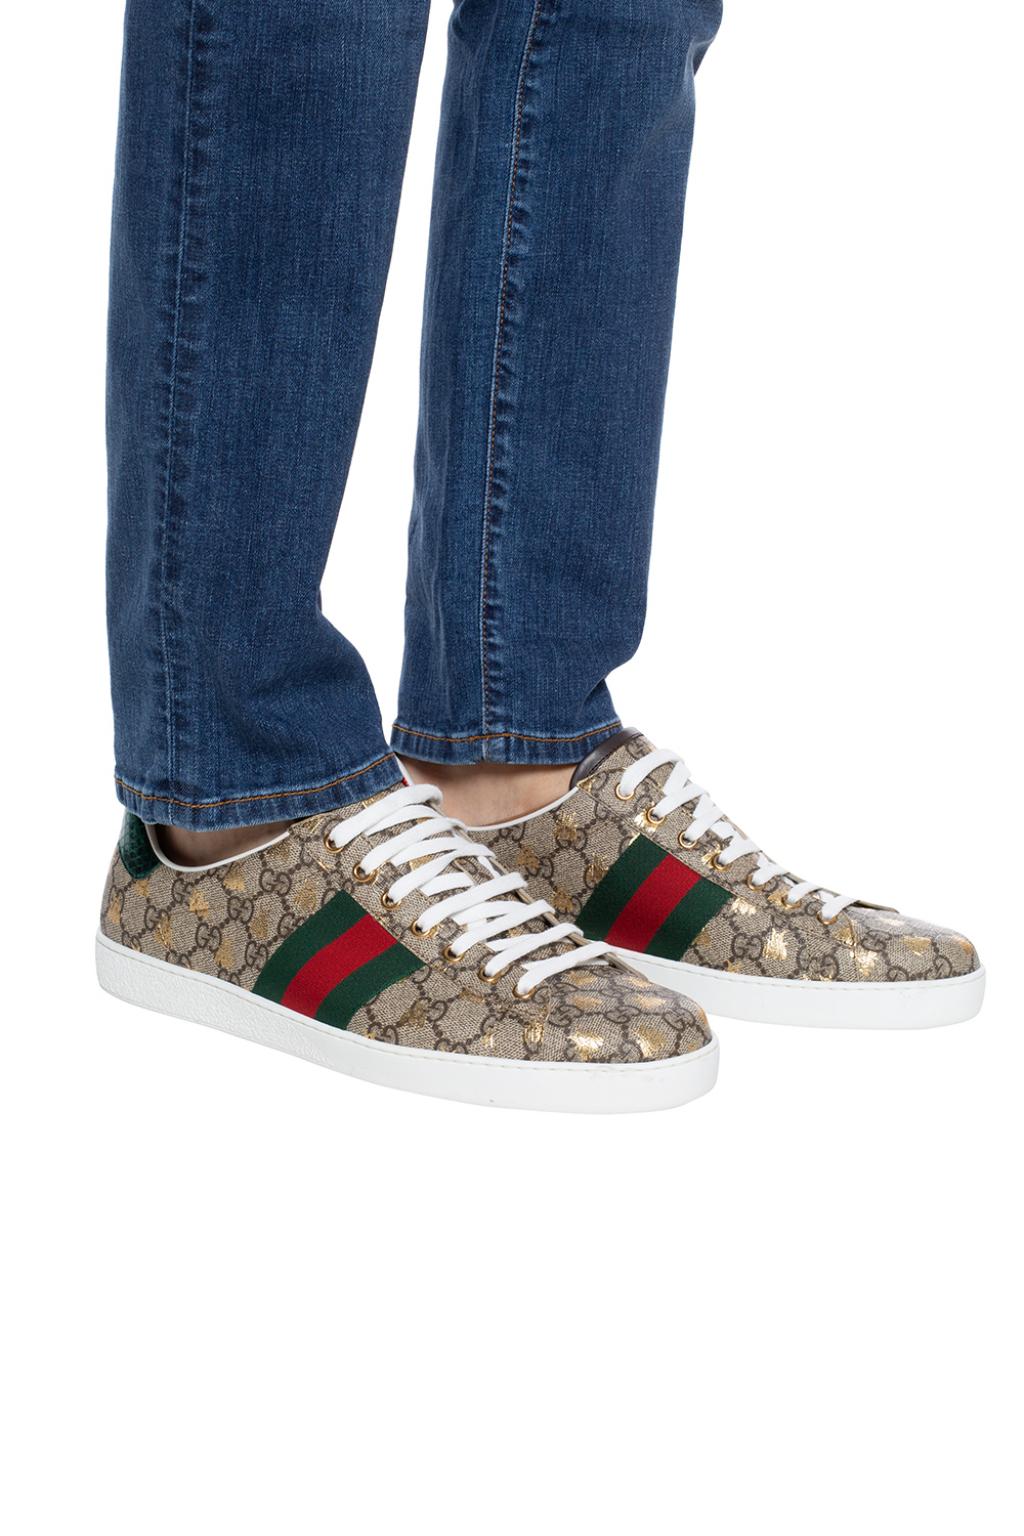 Ace' sneakers Gucci - Vitkac US